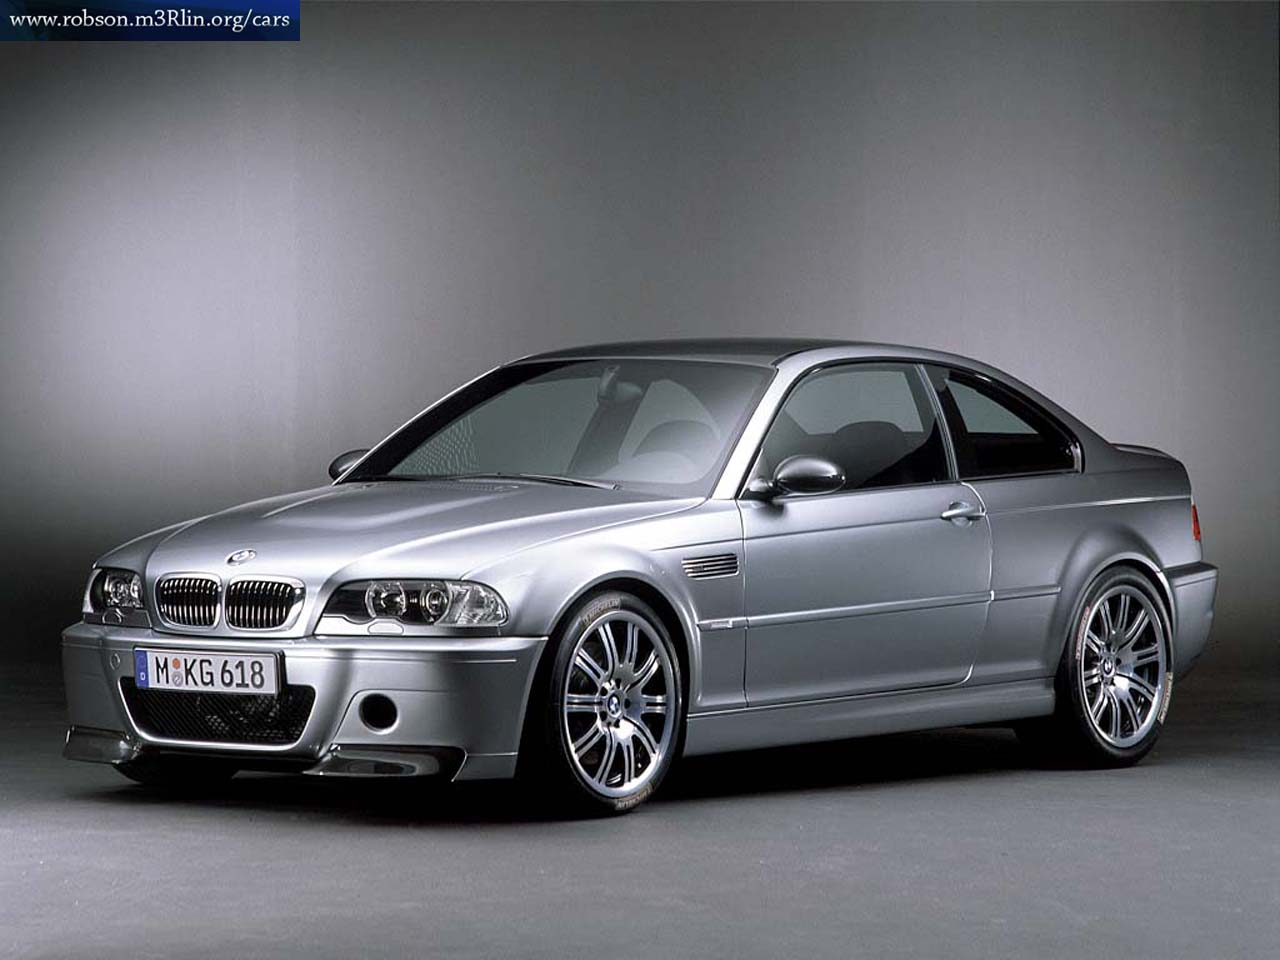 2002-bmw-m3-csl-concept-copy.jpg. Beginning with the first E36 M3â€²s